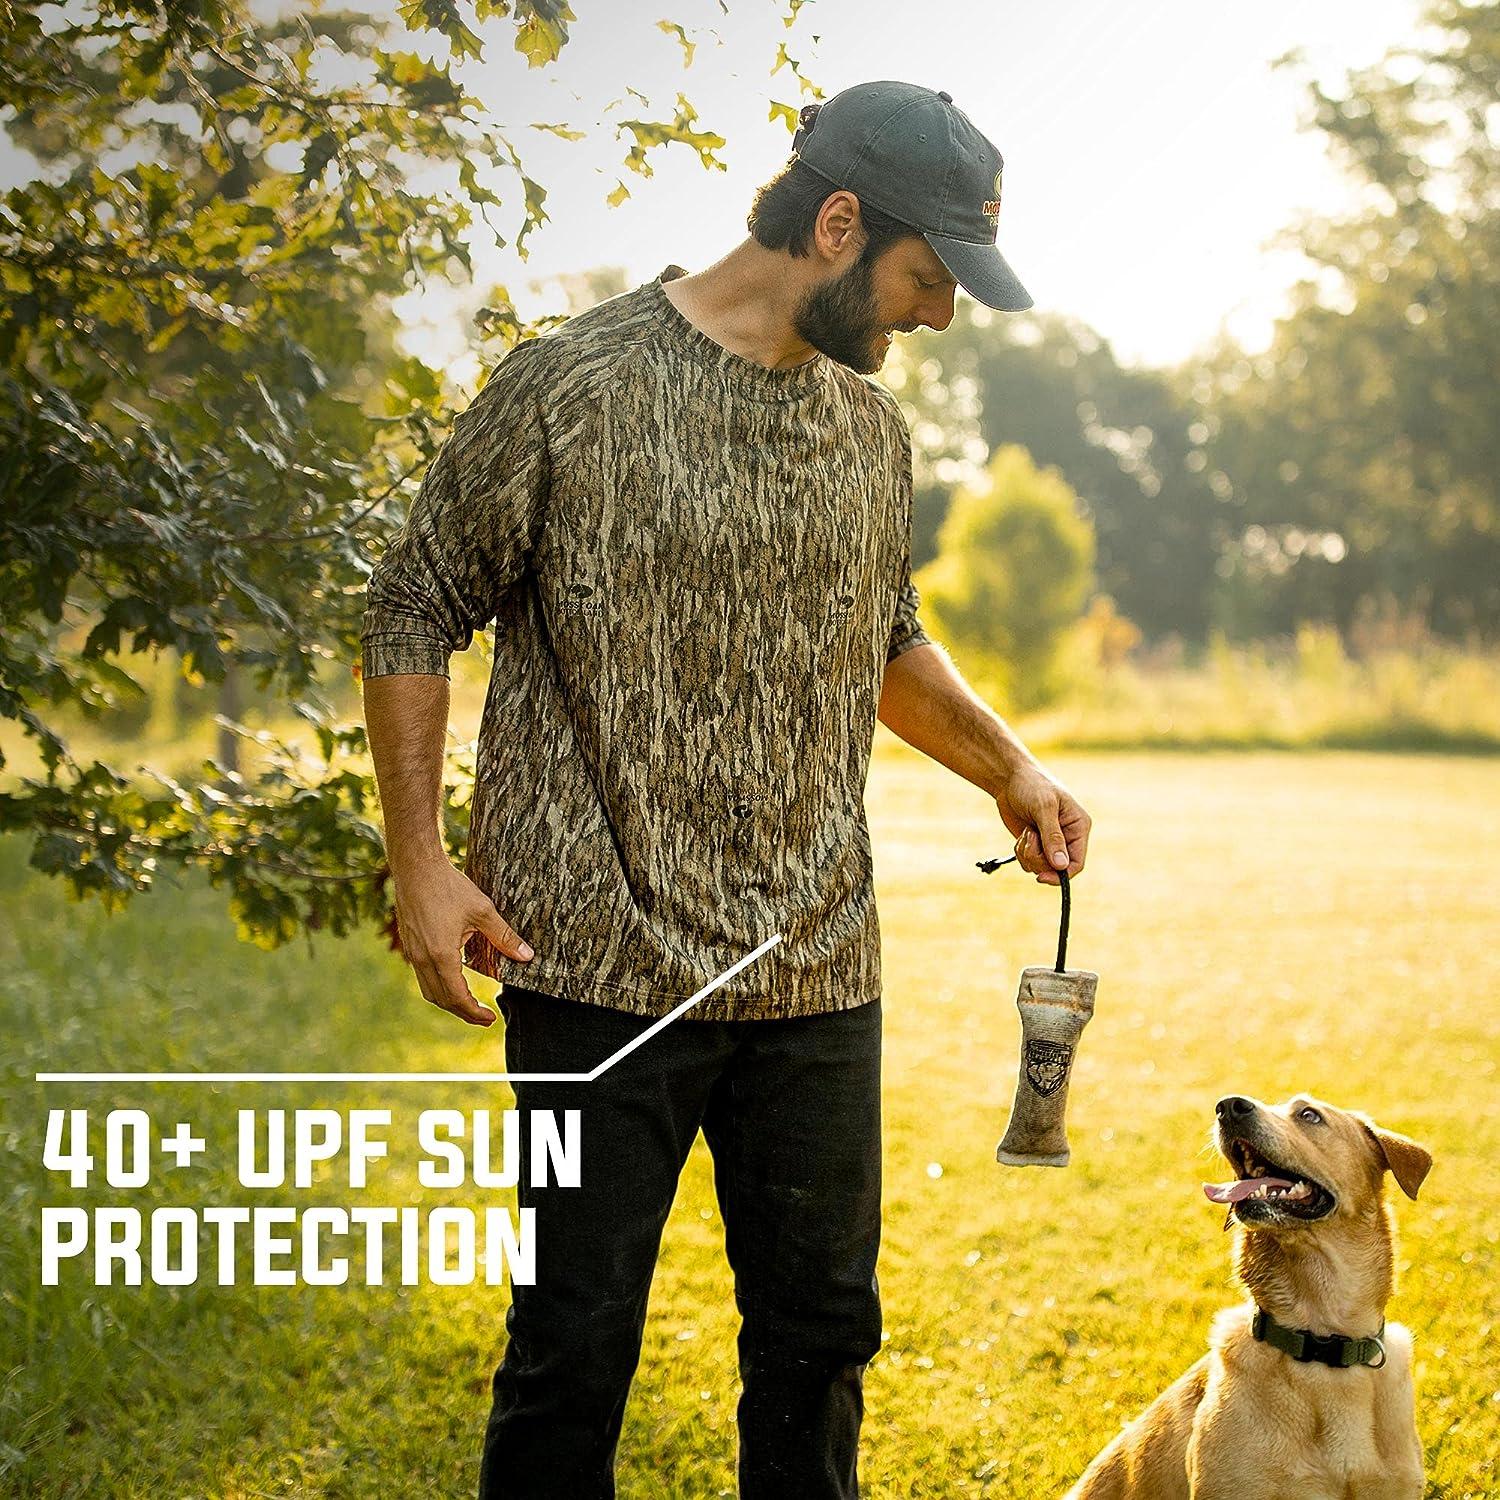 Hunting Shirts Made to Last--Outfit Your Obsession – The Mossy Oak